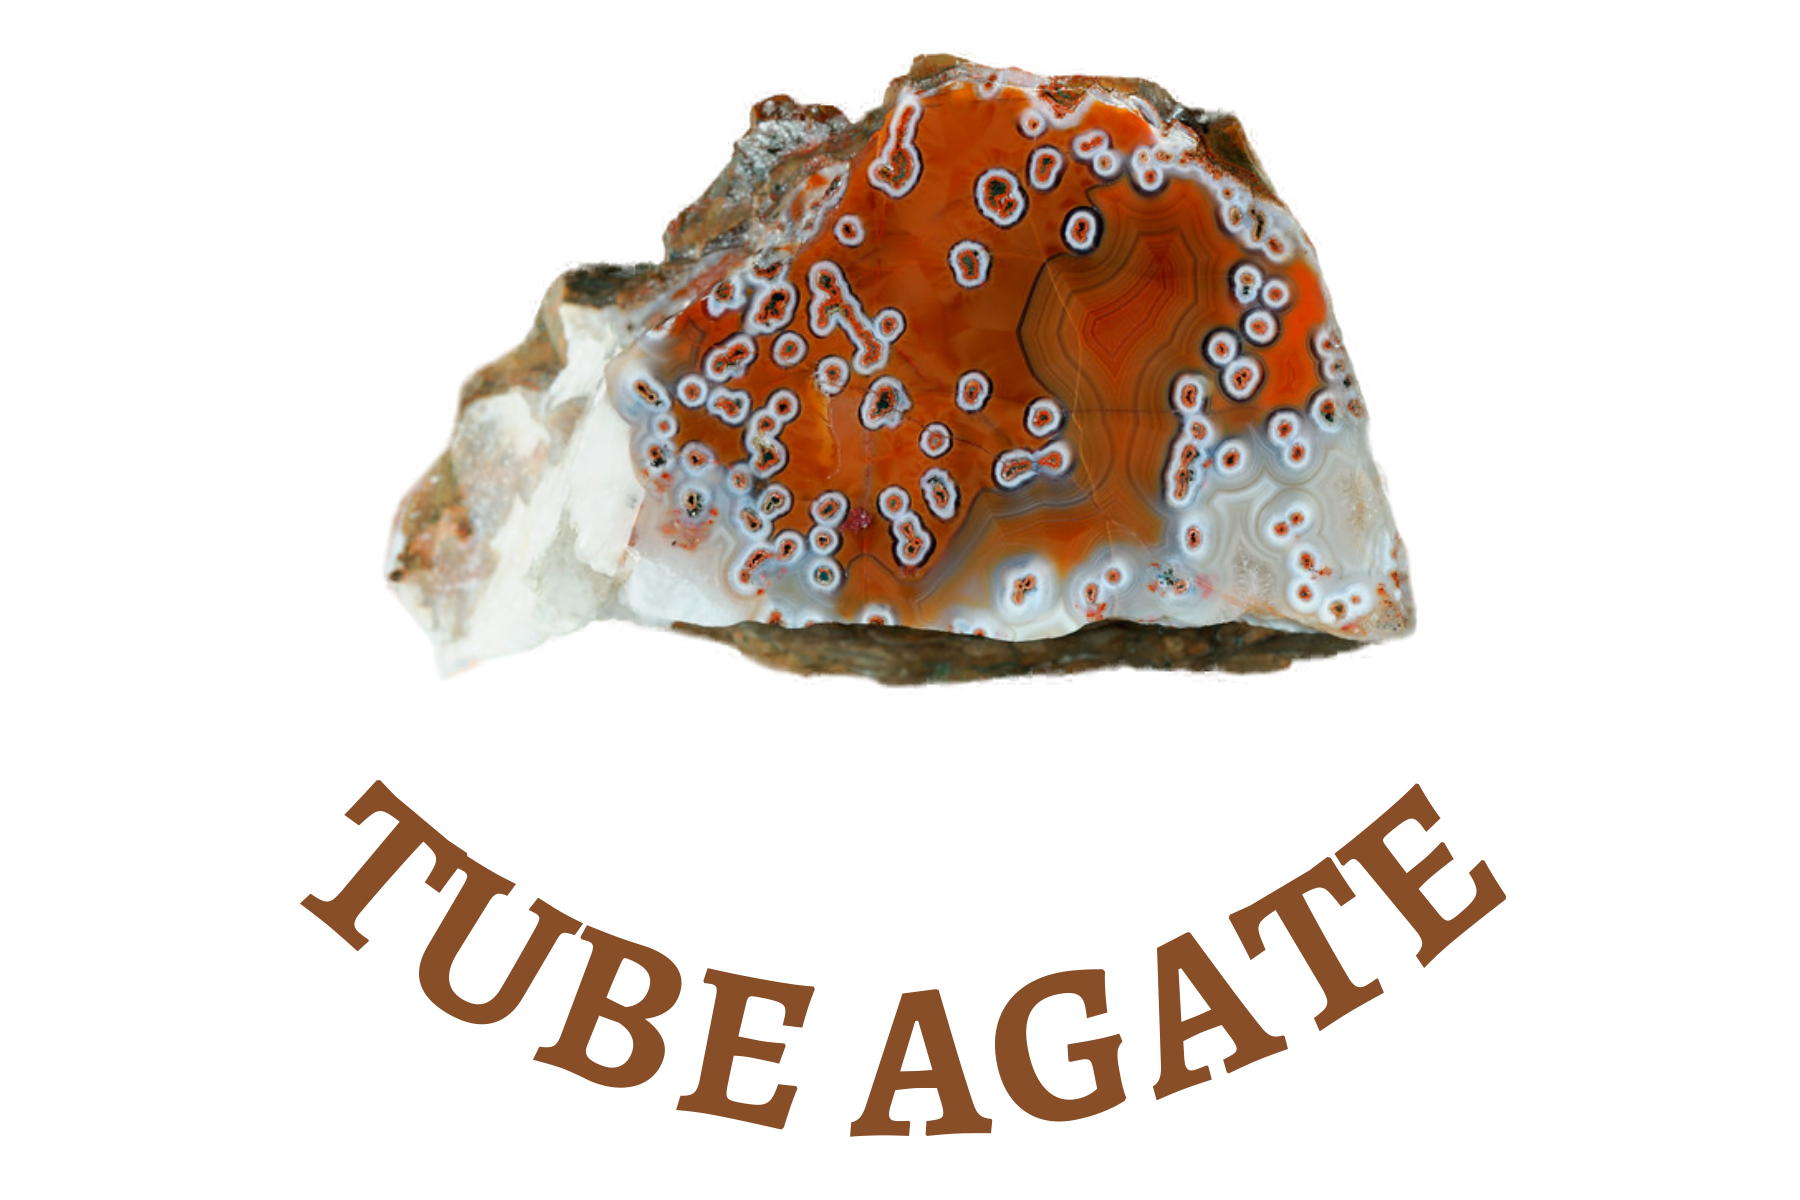 An orange Tube agate with small skyblue rings